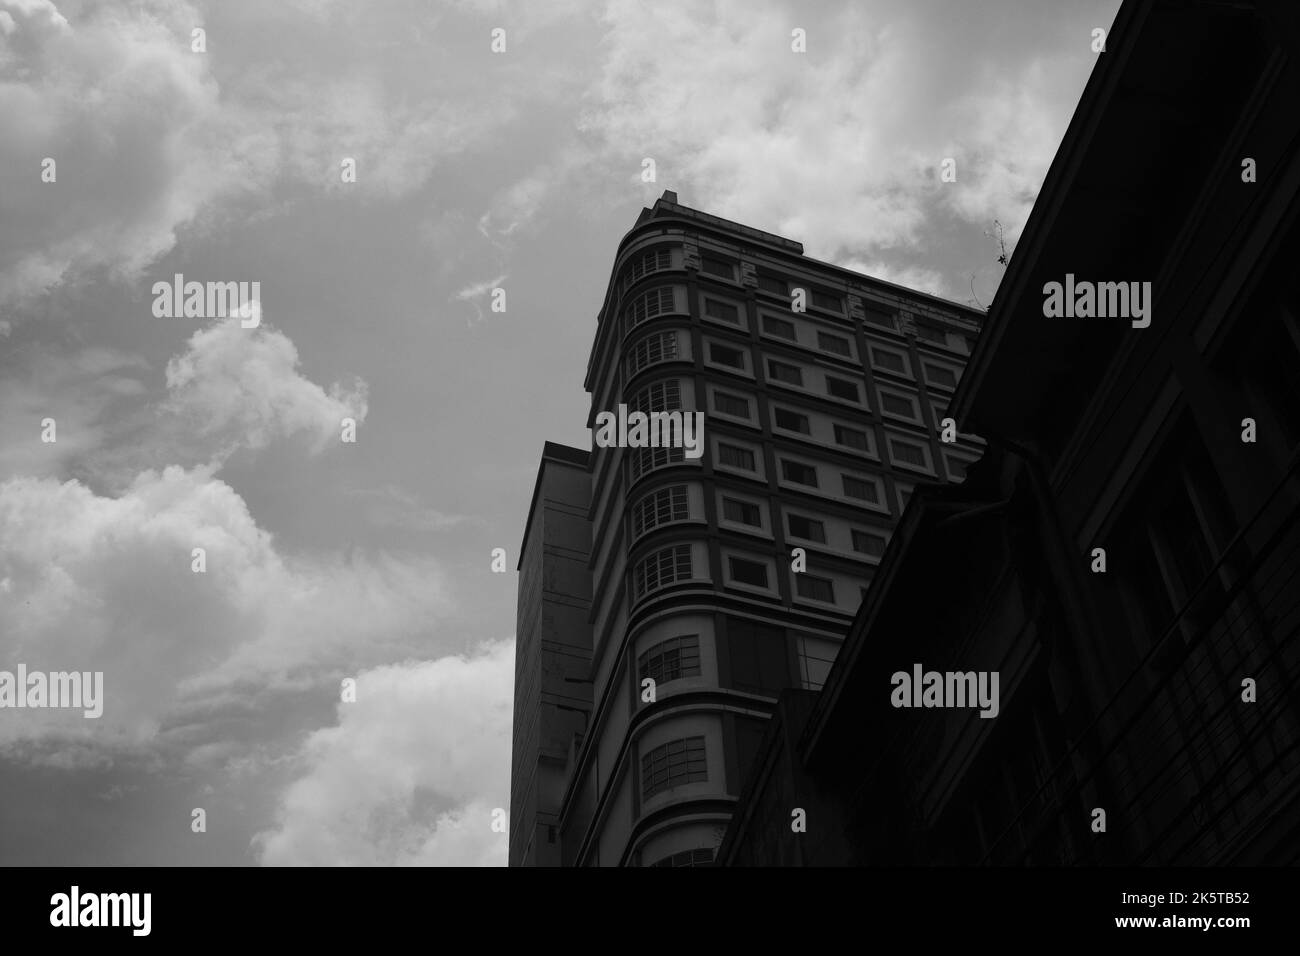 Modern Housing, Monochrome photo of a view of an apartment building with a clear sky background during the day in the Bandung area - Indonesia Stock Photo